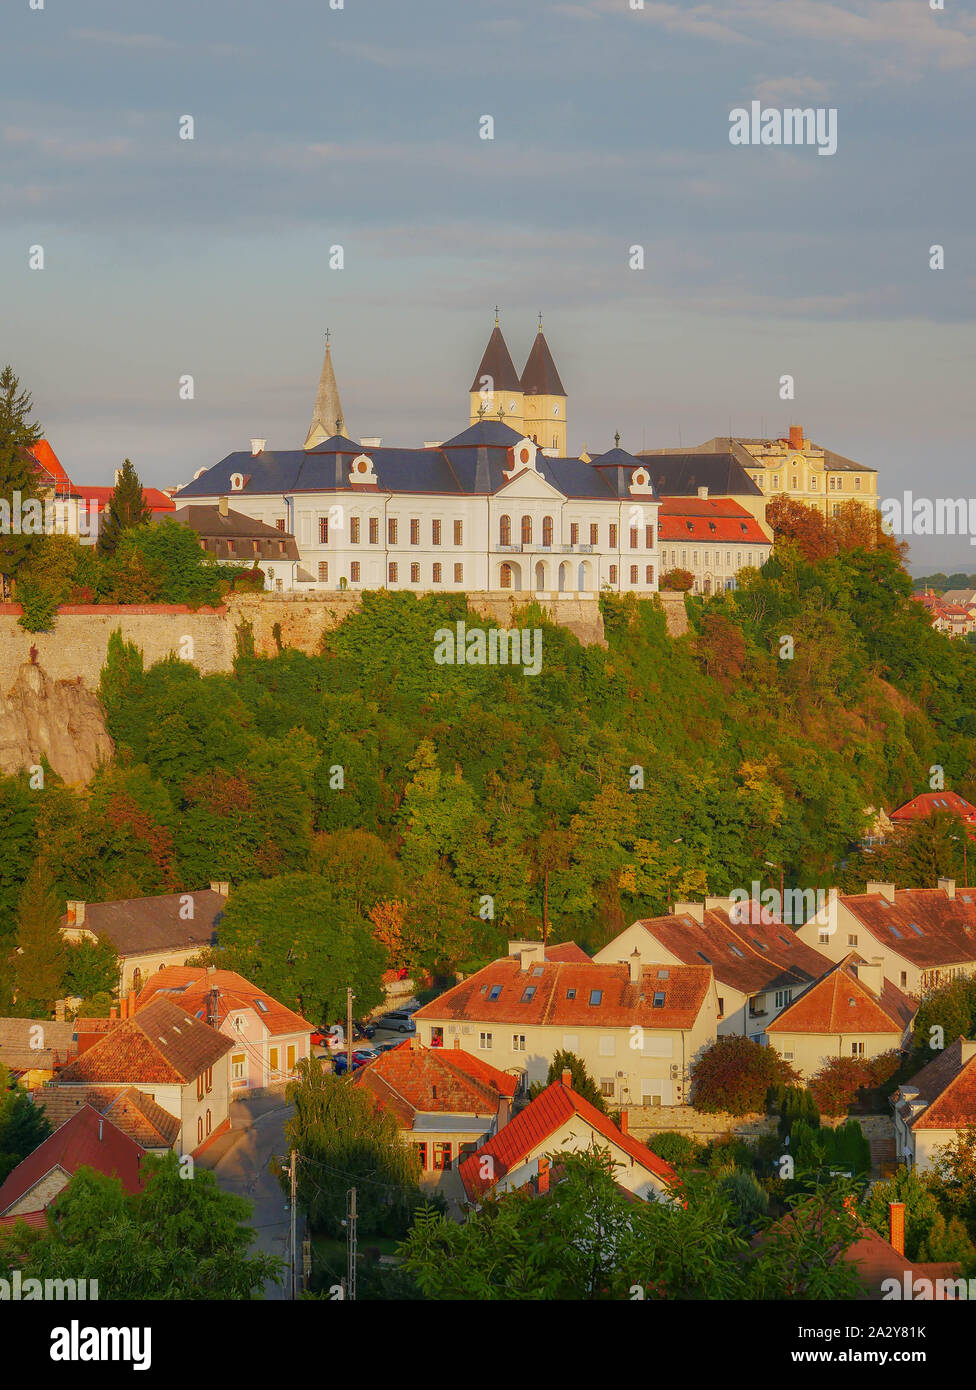 Dreamy view of the royal buildings on Castle Hill in Veszprem, Hungary Stock Photo